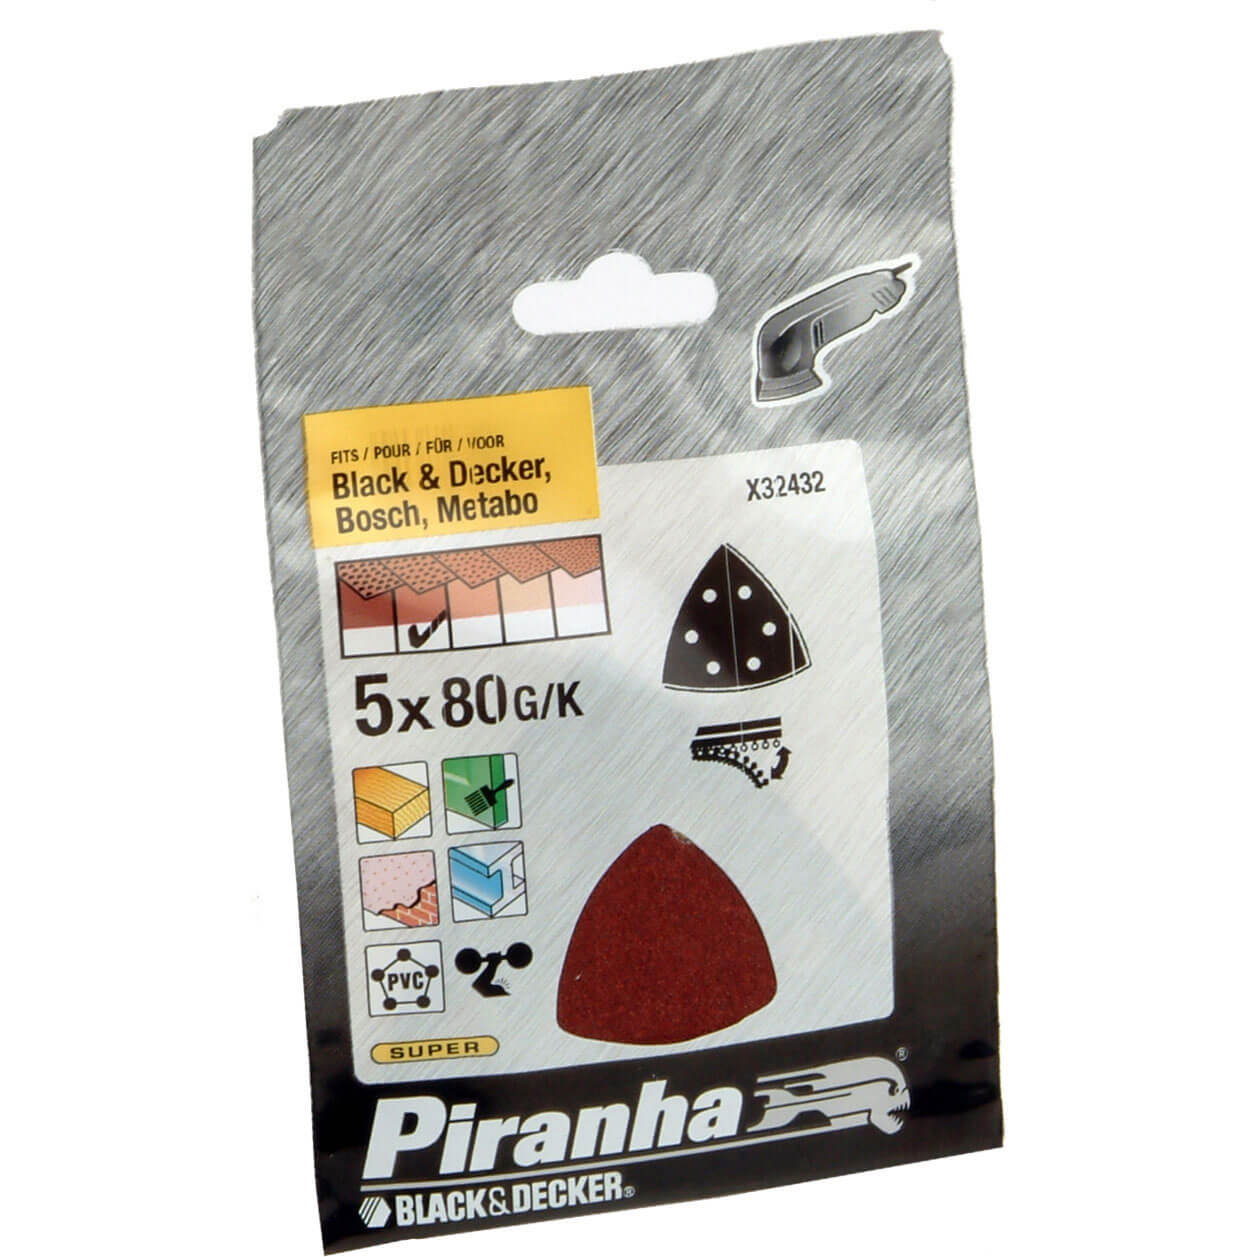 Image of Black and Decker Piranha Quick Fit Delta Sanding Sheets 80g Pack of 5